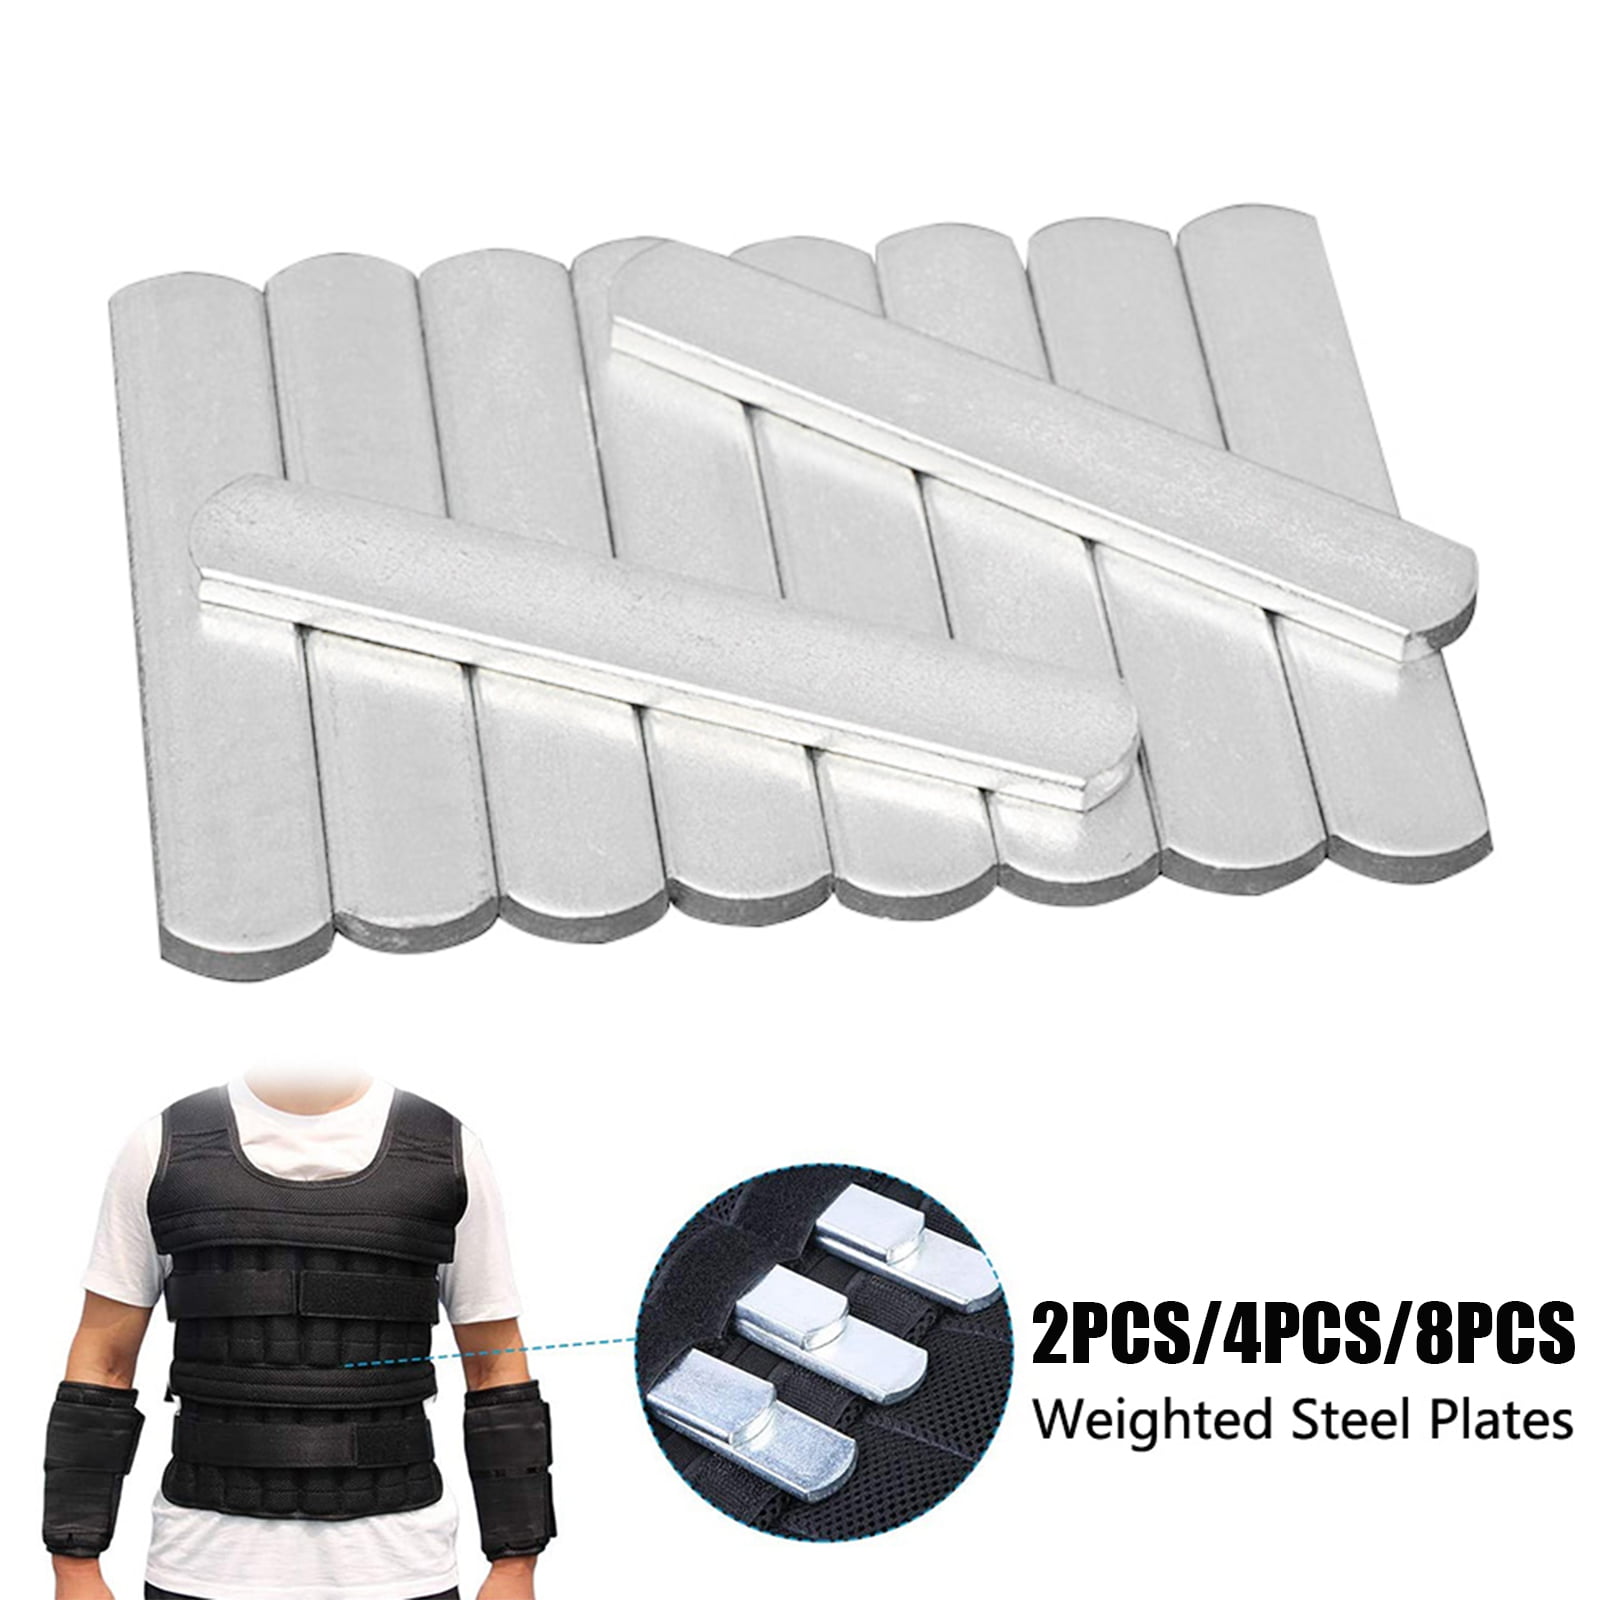 4pcs Stainless Steel Plates Rounded Steel Weighted Vest Plates Ankle Weights 